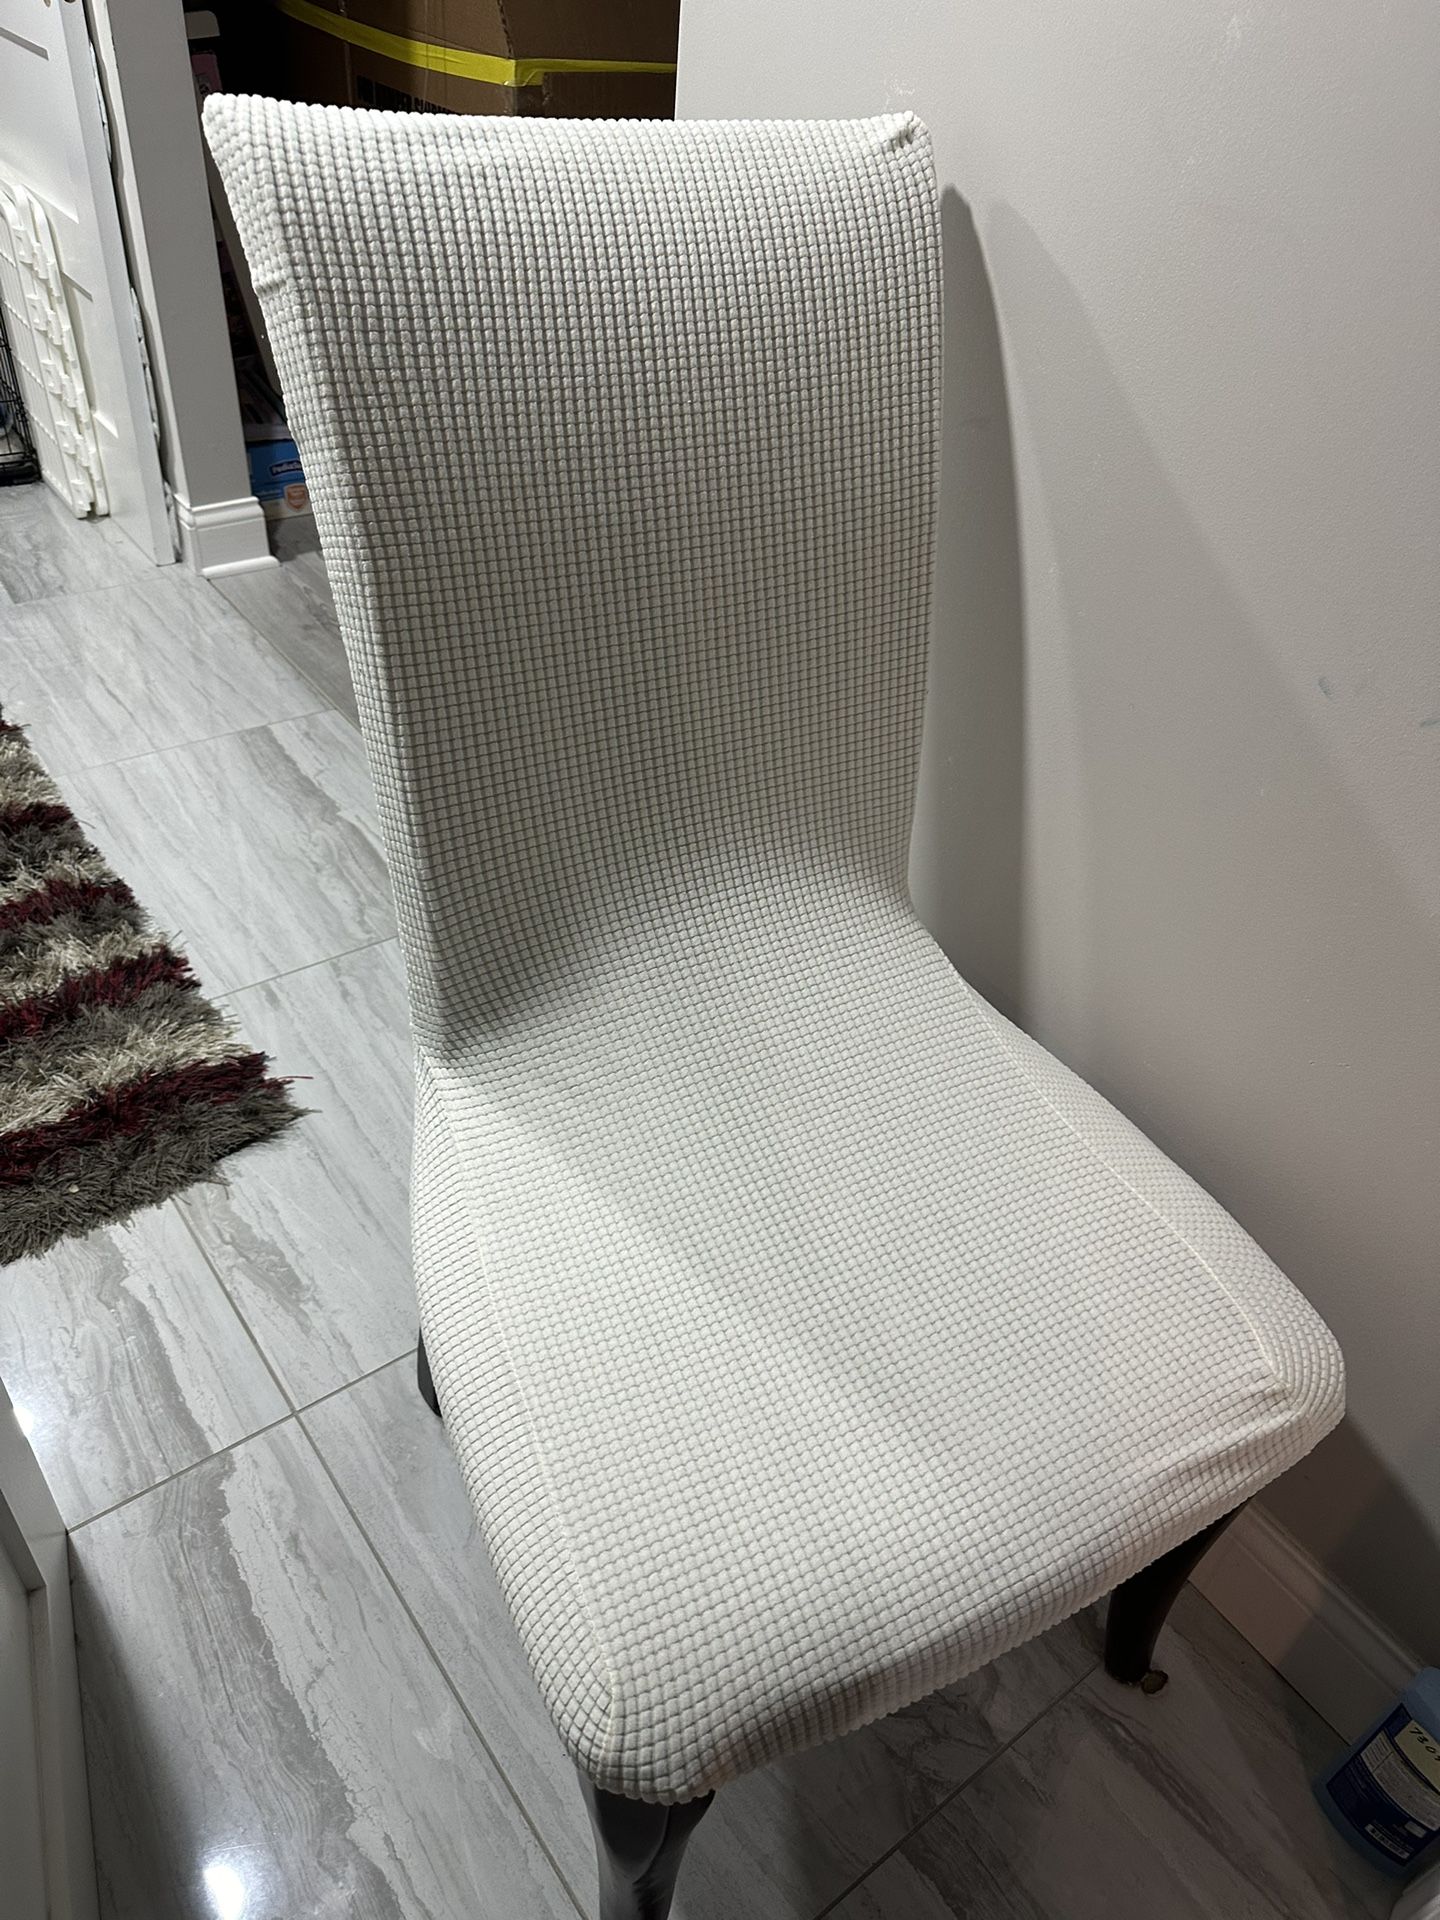 New Set of 4 high back chair covers, ivory